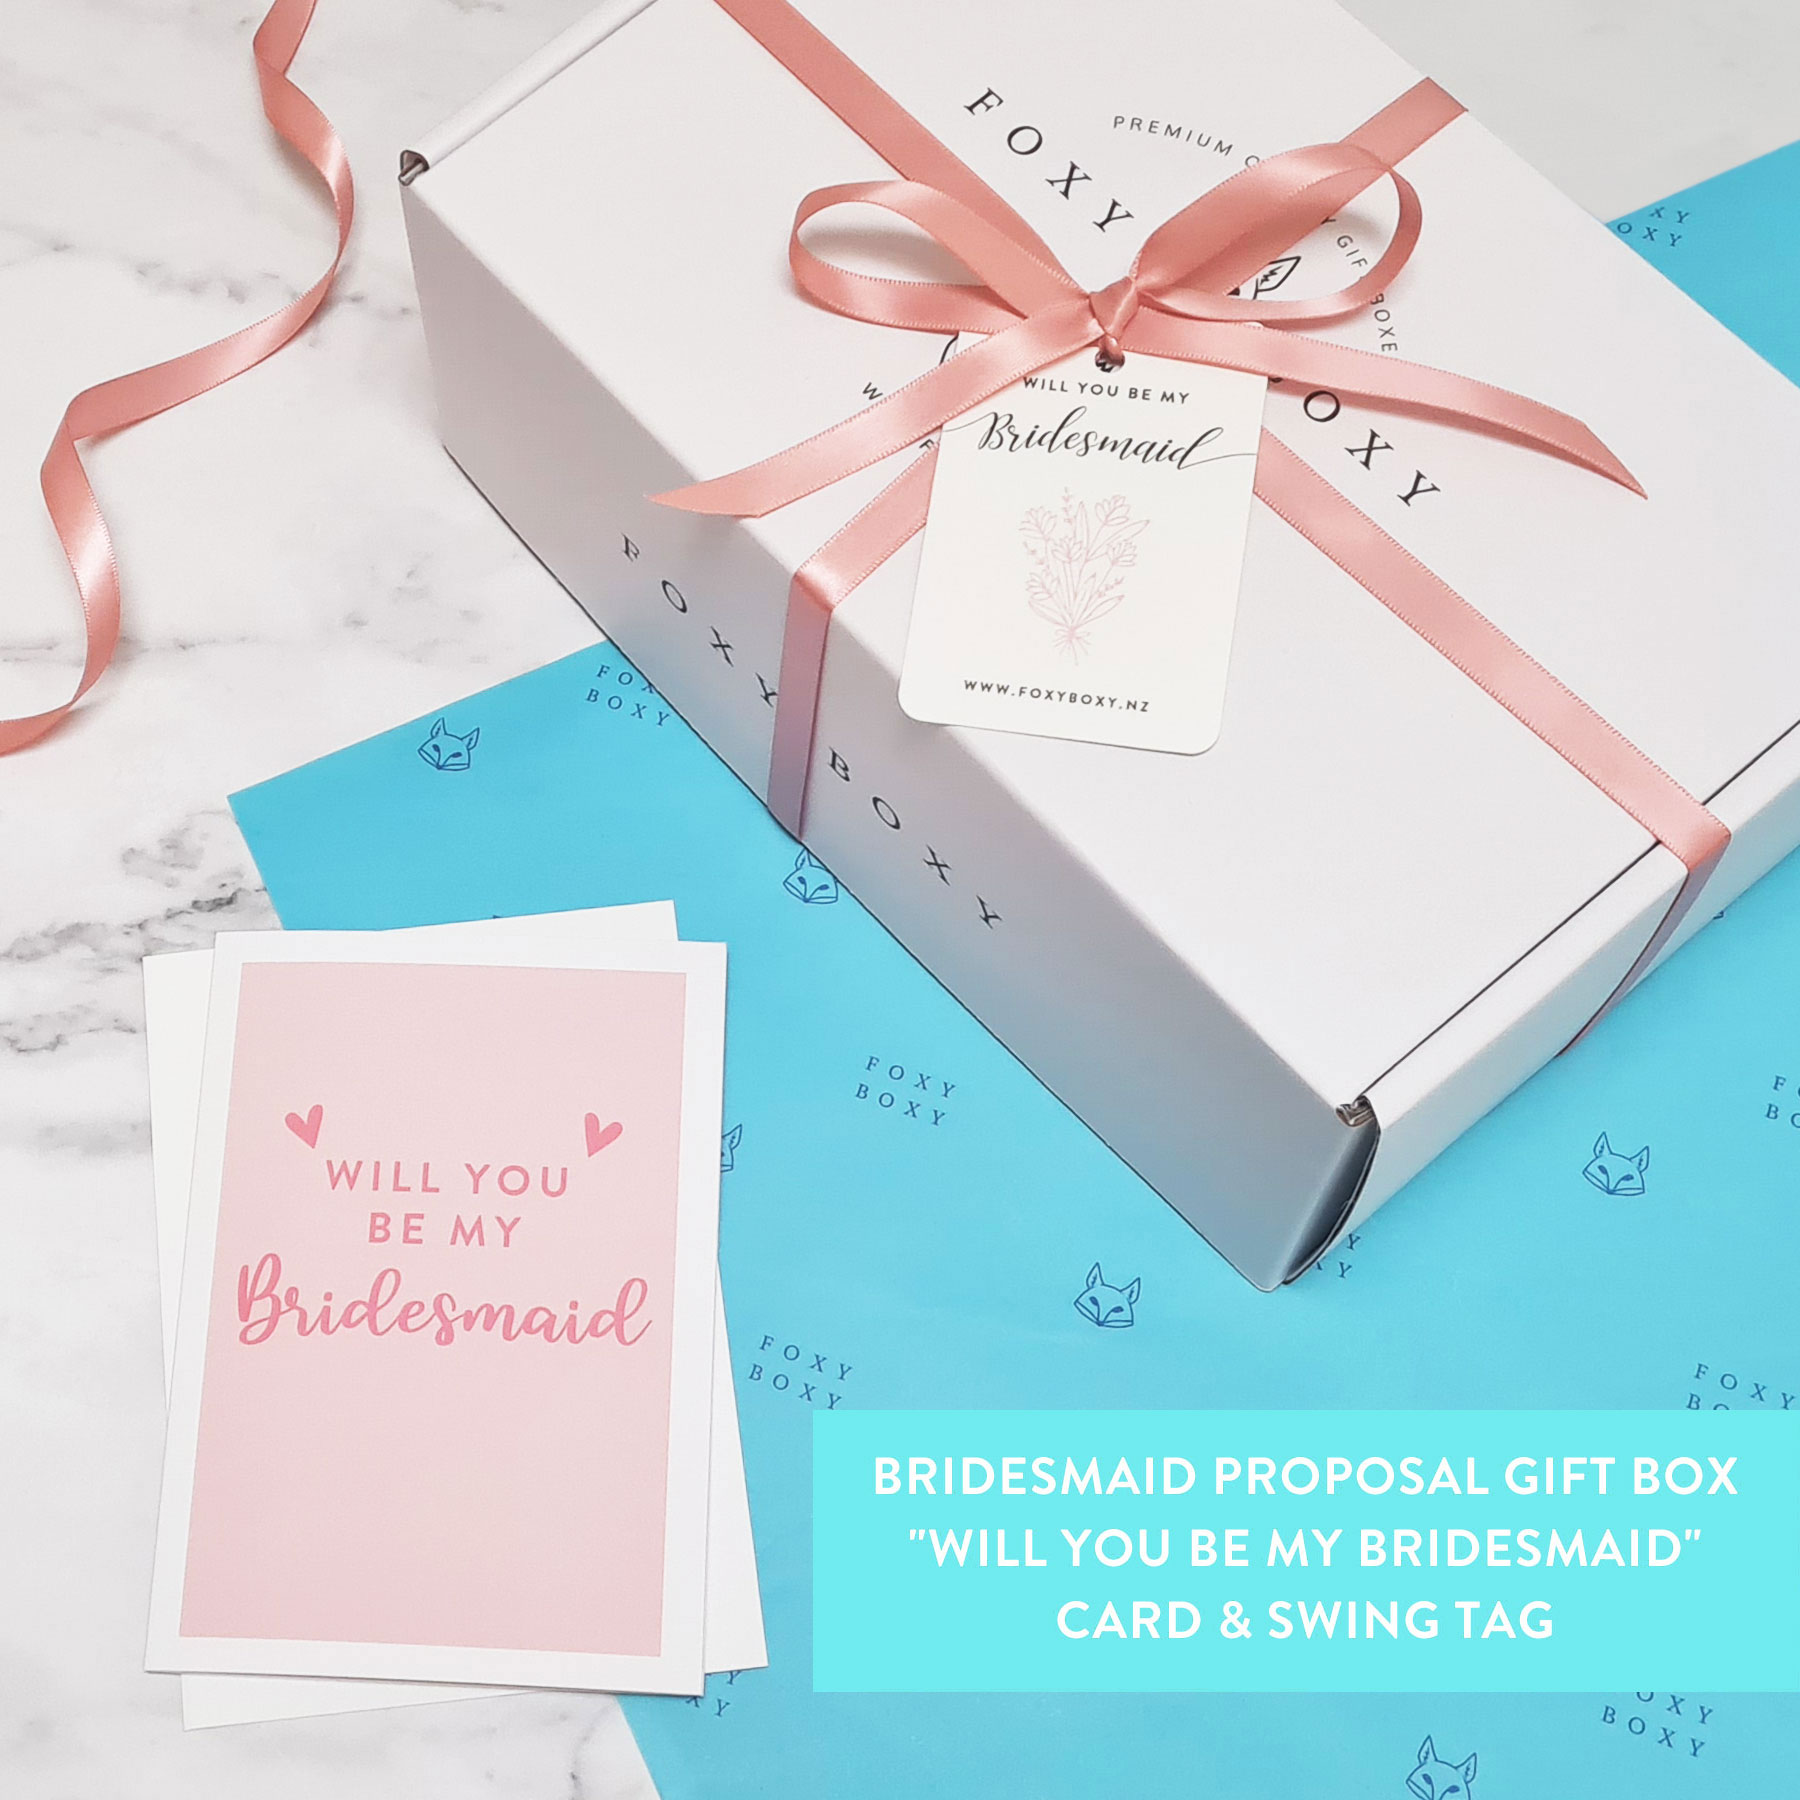 bhardwaj cool recommends will you be my bridesmaid gif pic